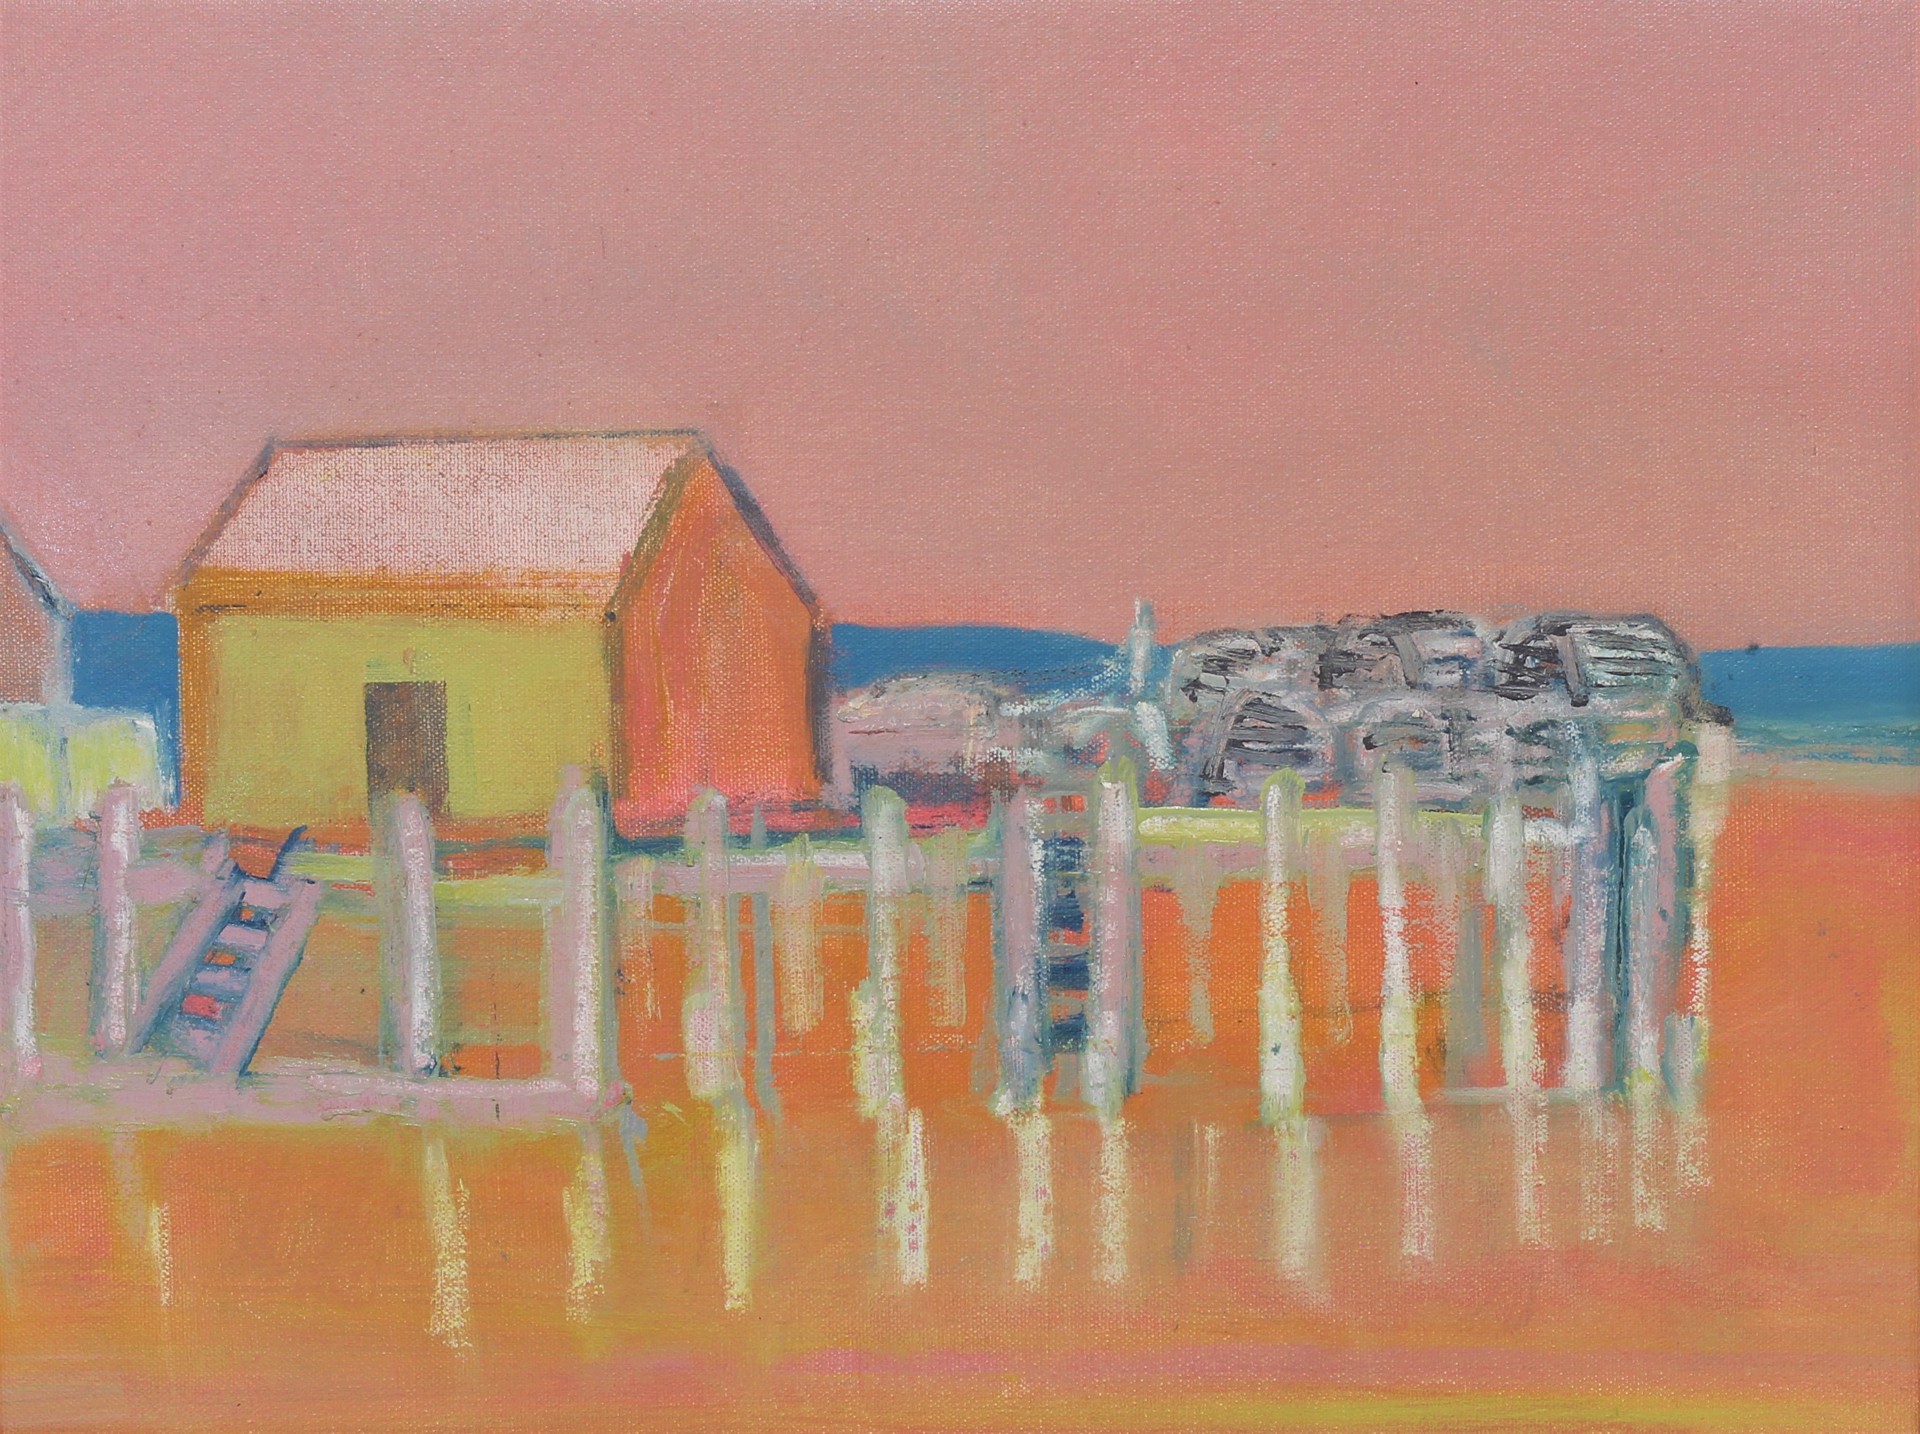 PINK SKY AT NIGHT...WHAT A DELIGHT by CHRISTINA THWAITES (Landscape)